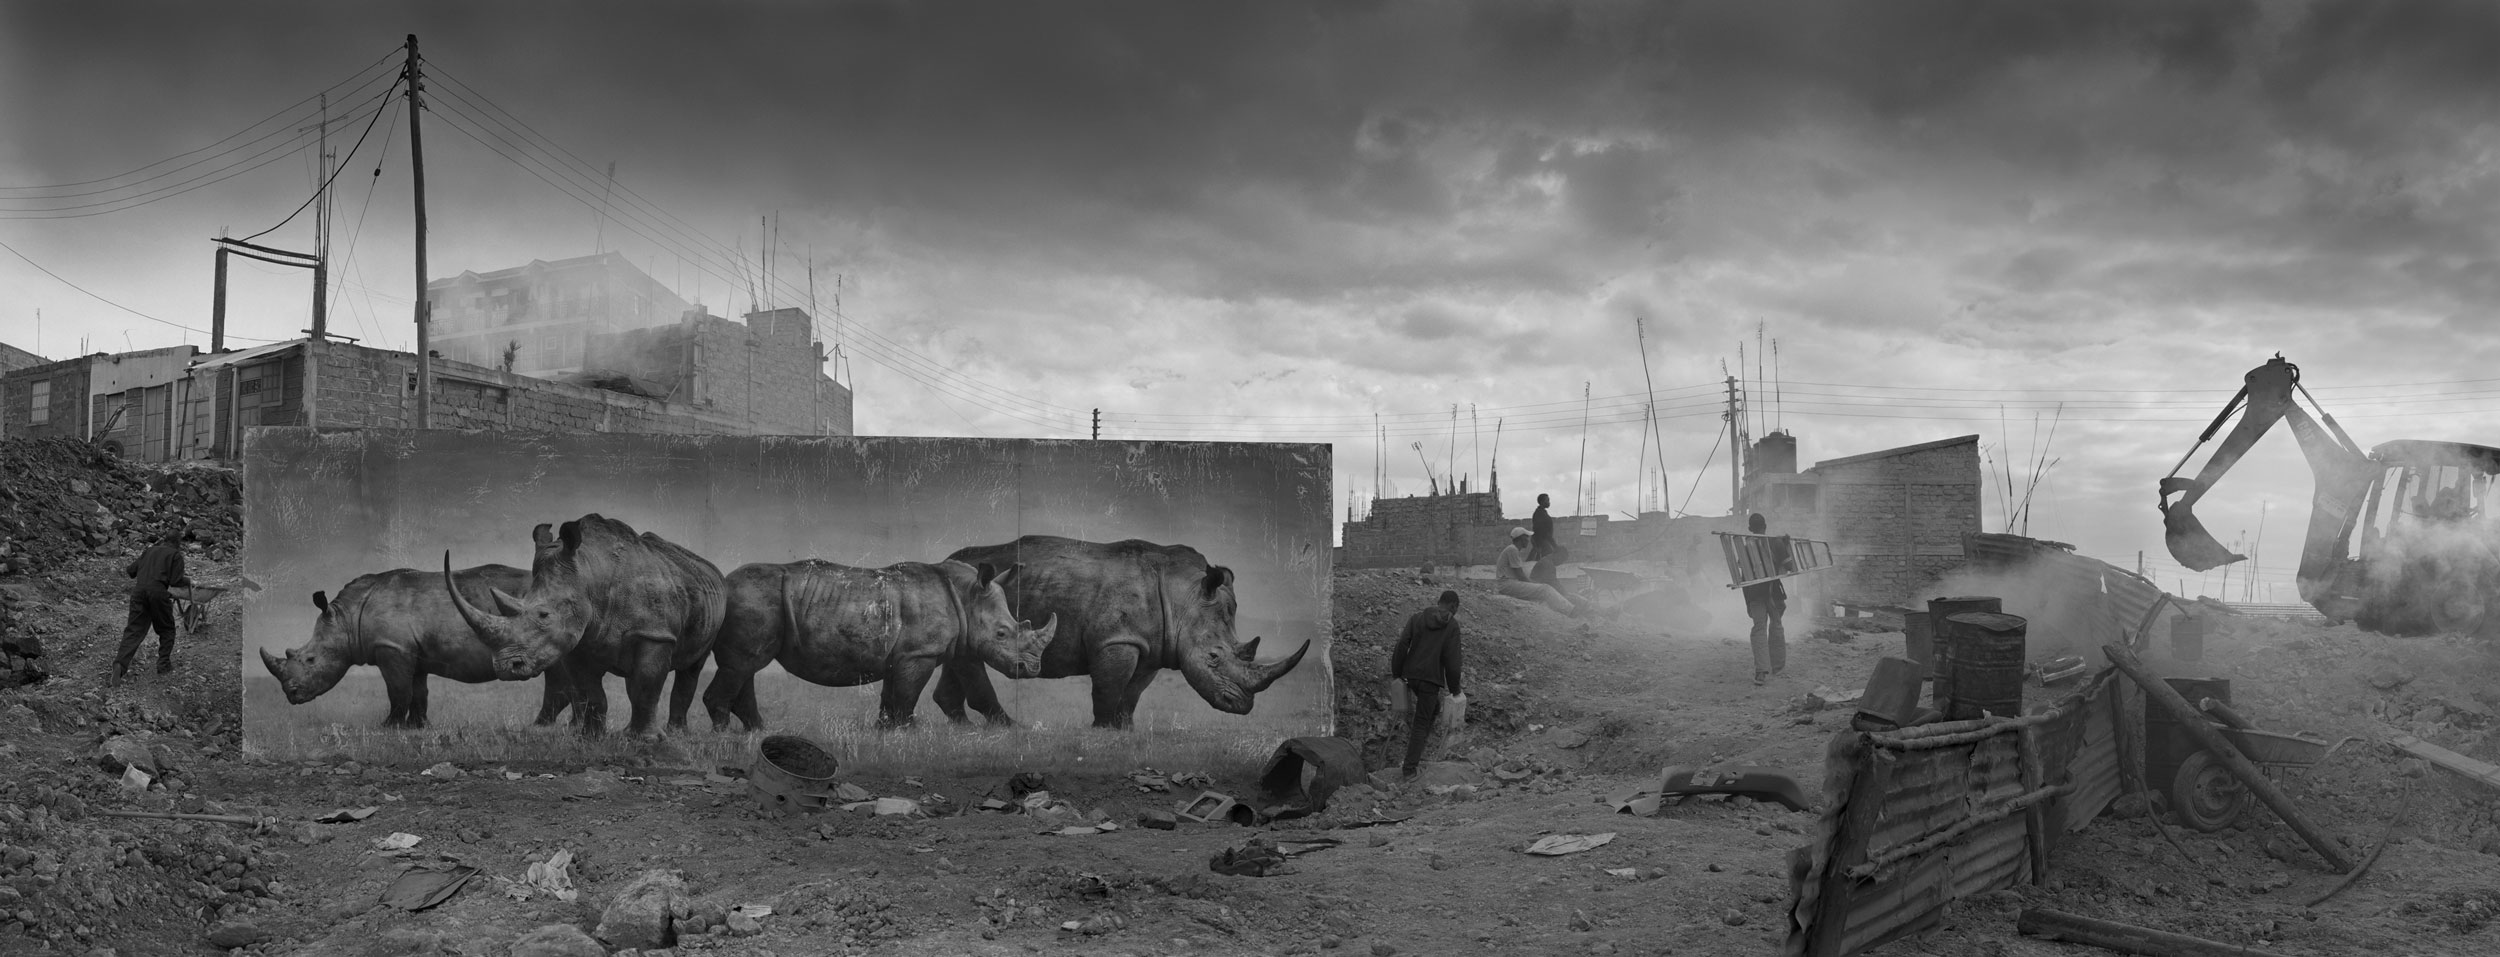 CONSTRUCTION-SITE-WITH-RHINOS